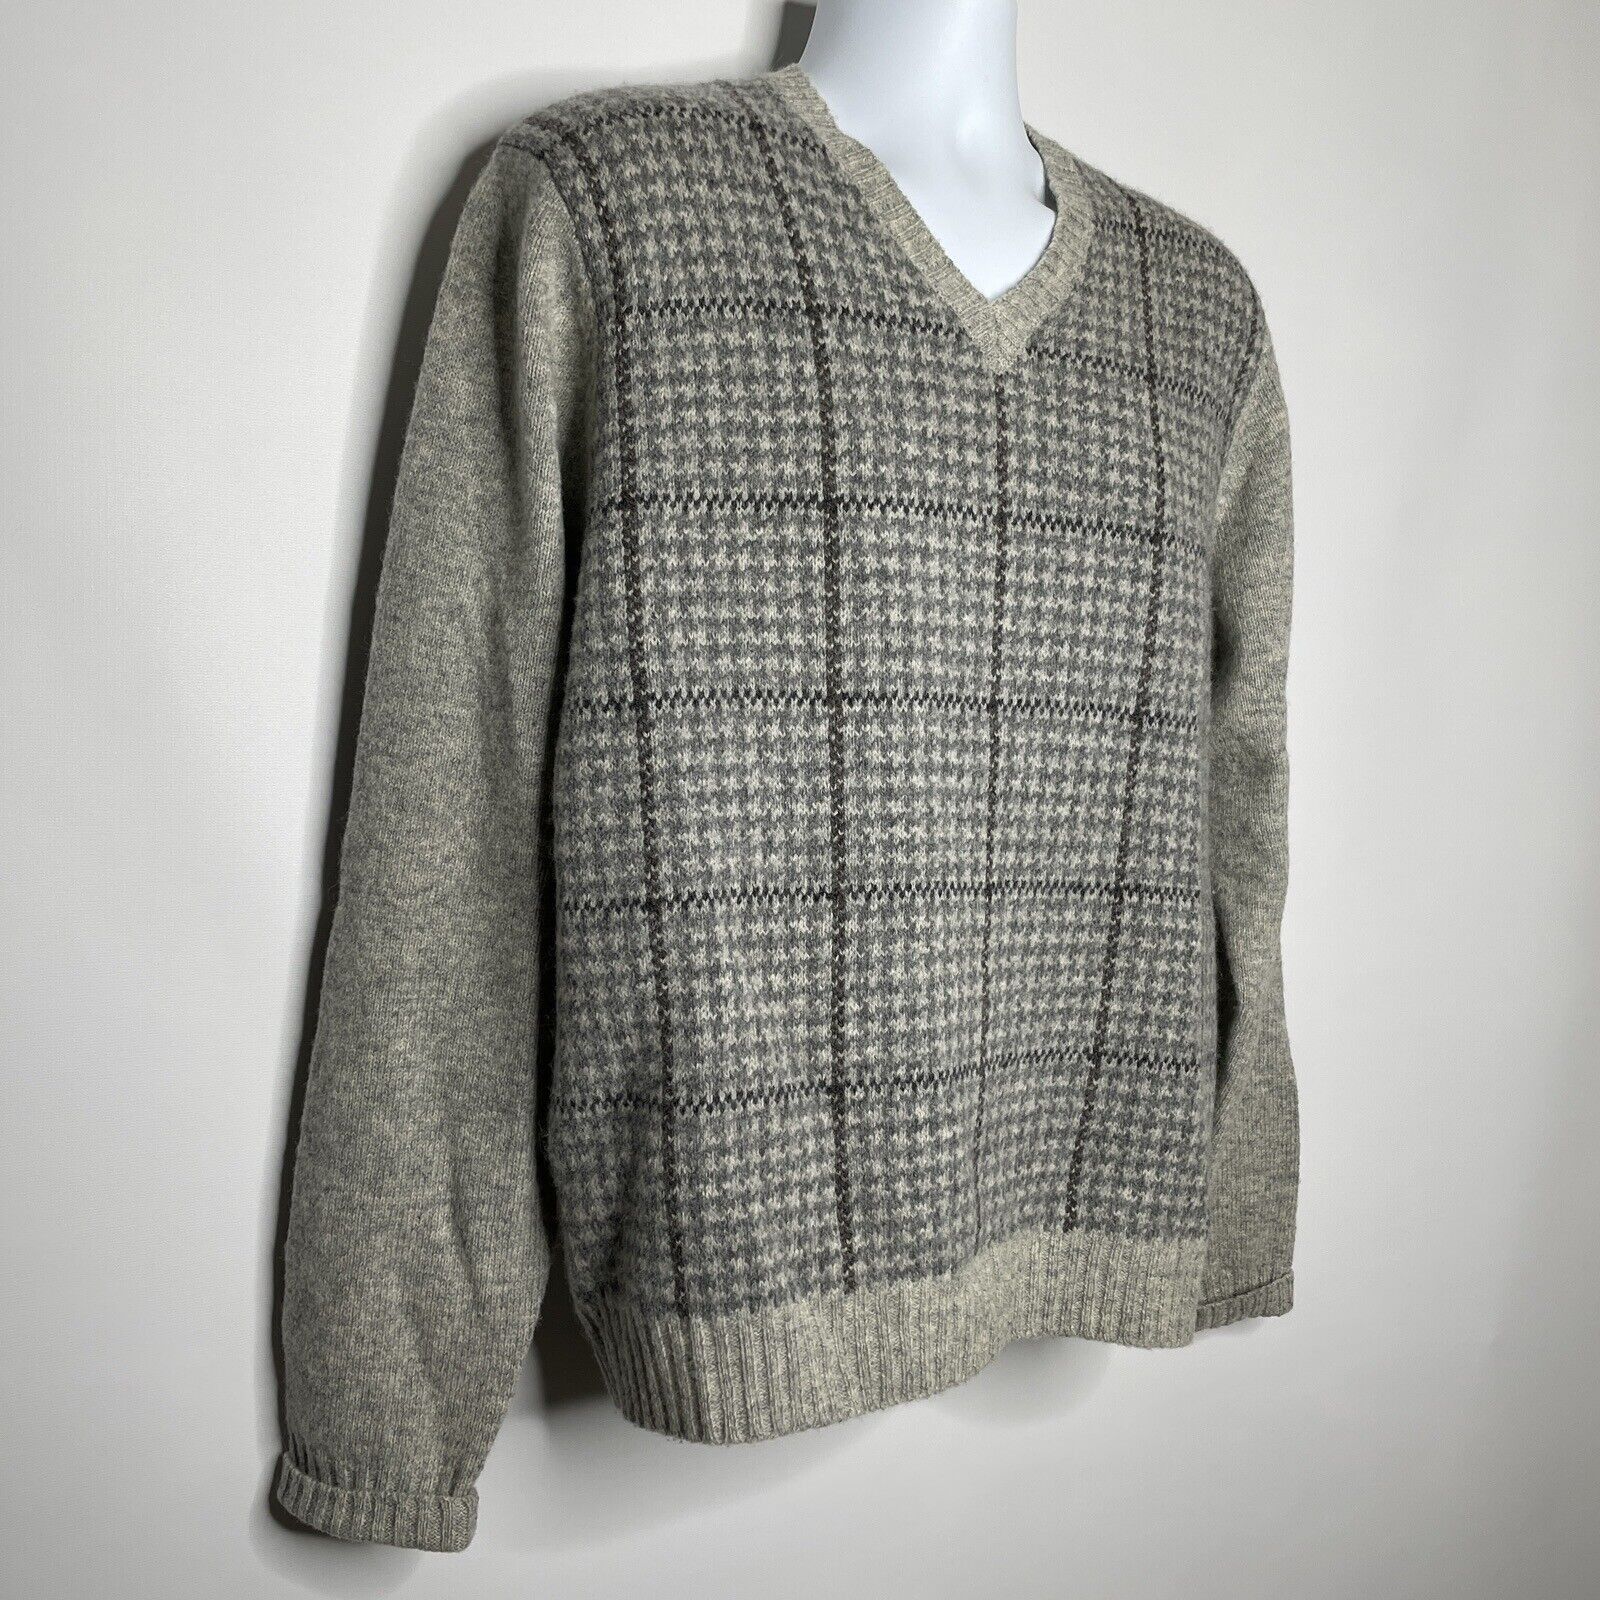 Vintage 80s Gray Shetland Wool Houndstooth Plaid Pullover Sweater Size US L / EU 52-54 / 3 - 3 Thumbnail